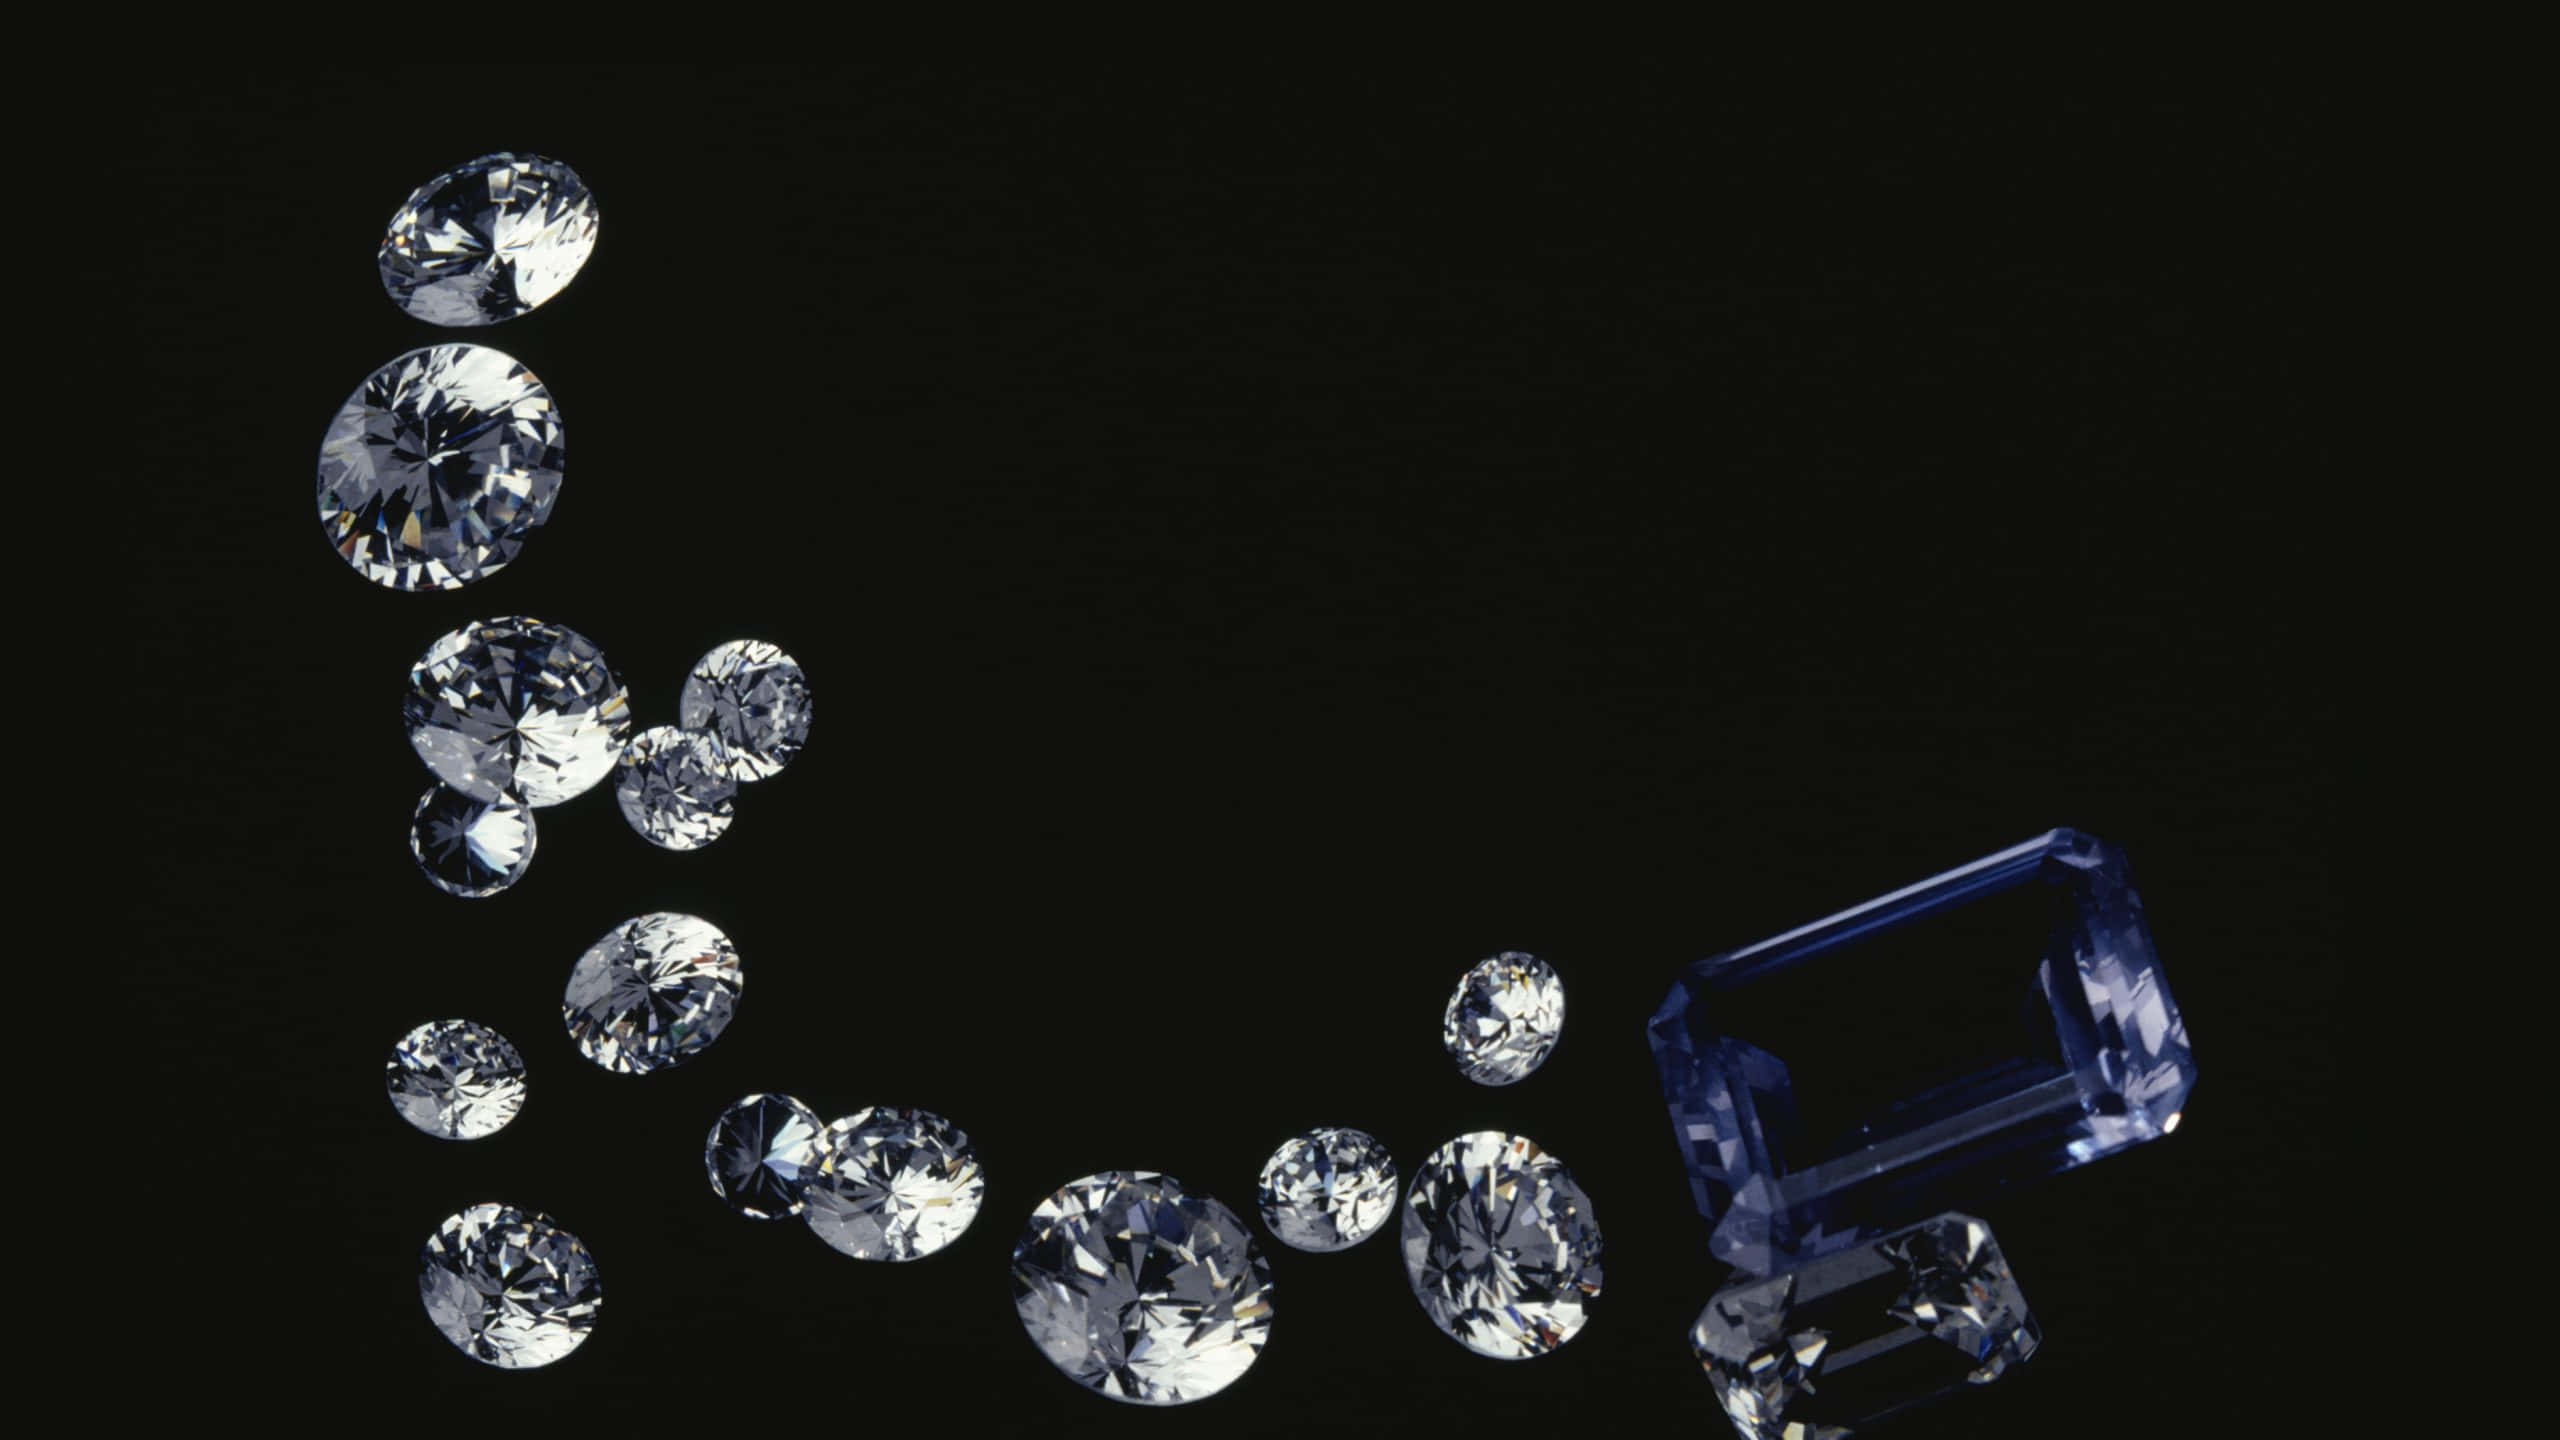 A close up image of a shining and dazzling diamond